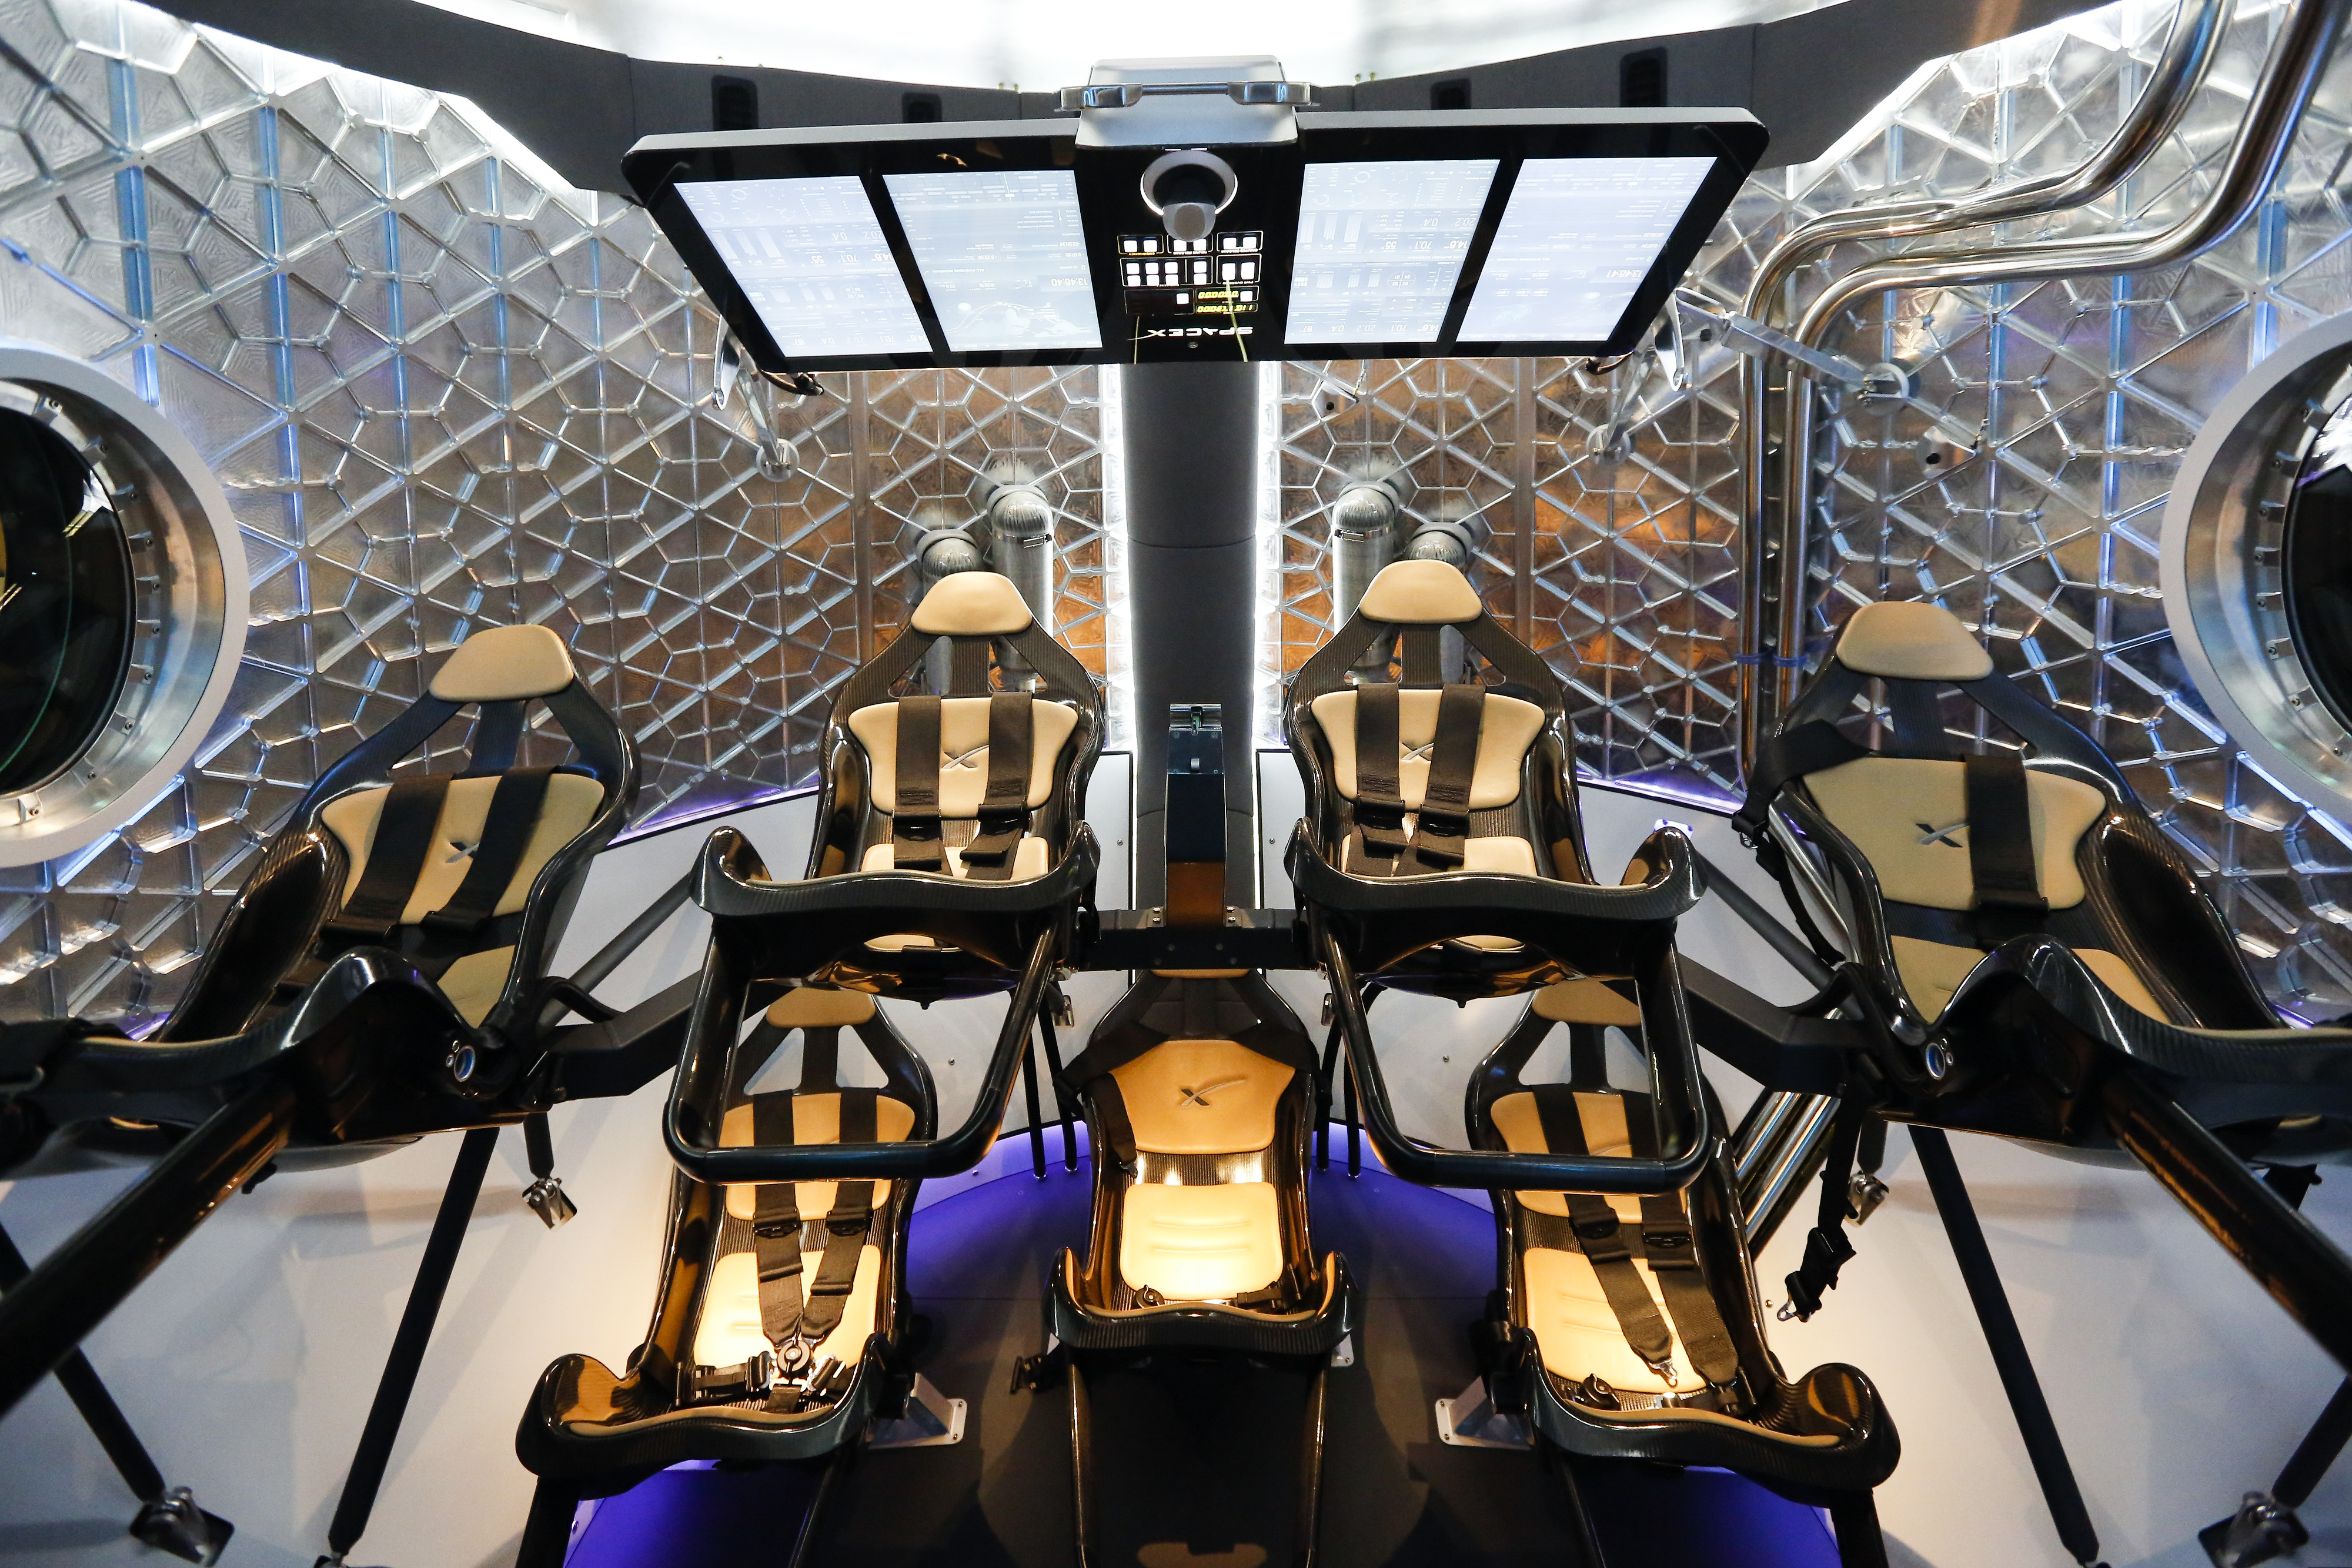 Seats rest inside the Manned Dragon V2 Space Taxi in Hawthorne, California, U.S., on Thursday, May 29, 2014. (Bloomberg&mdash;Bloomberg via Getty Images)